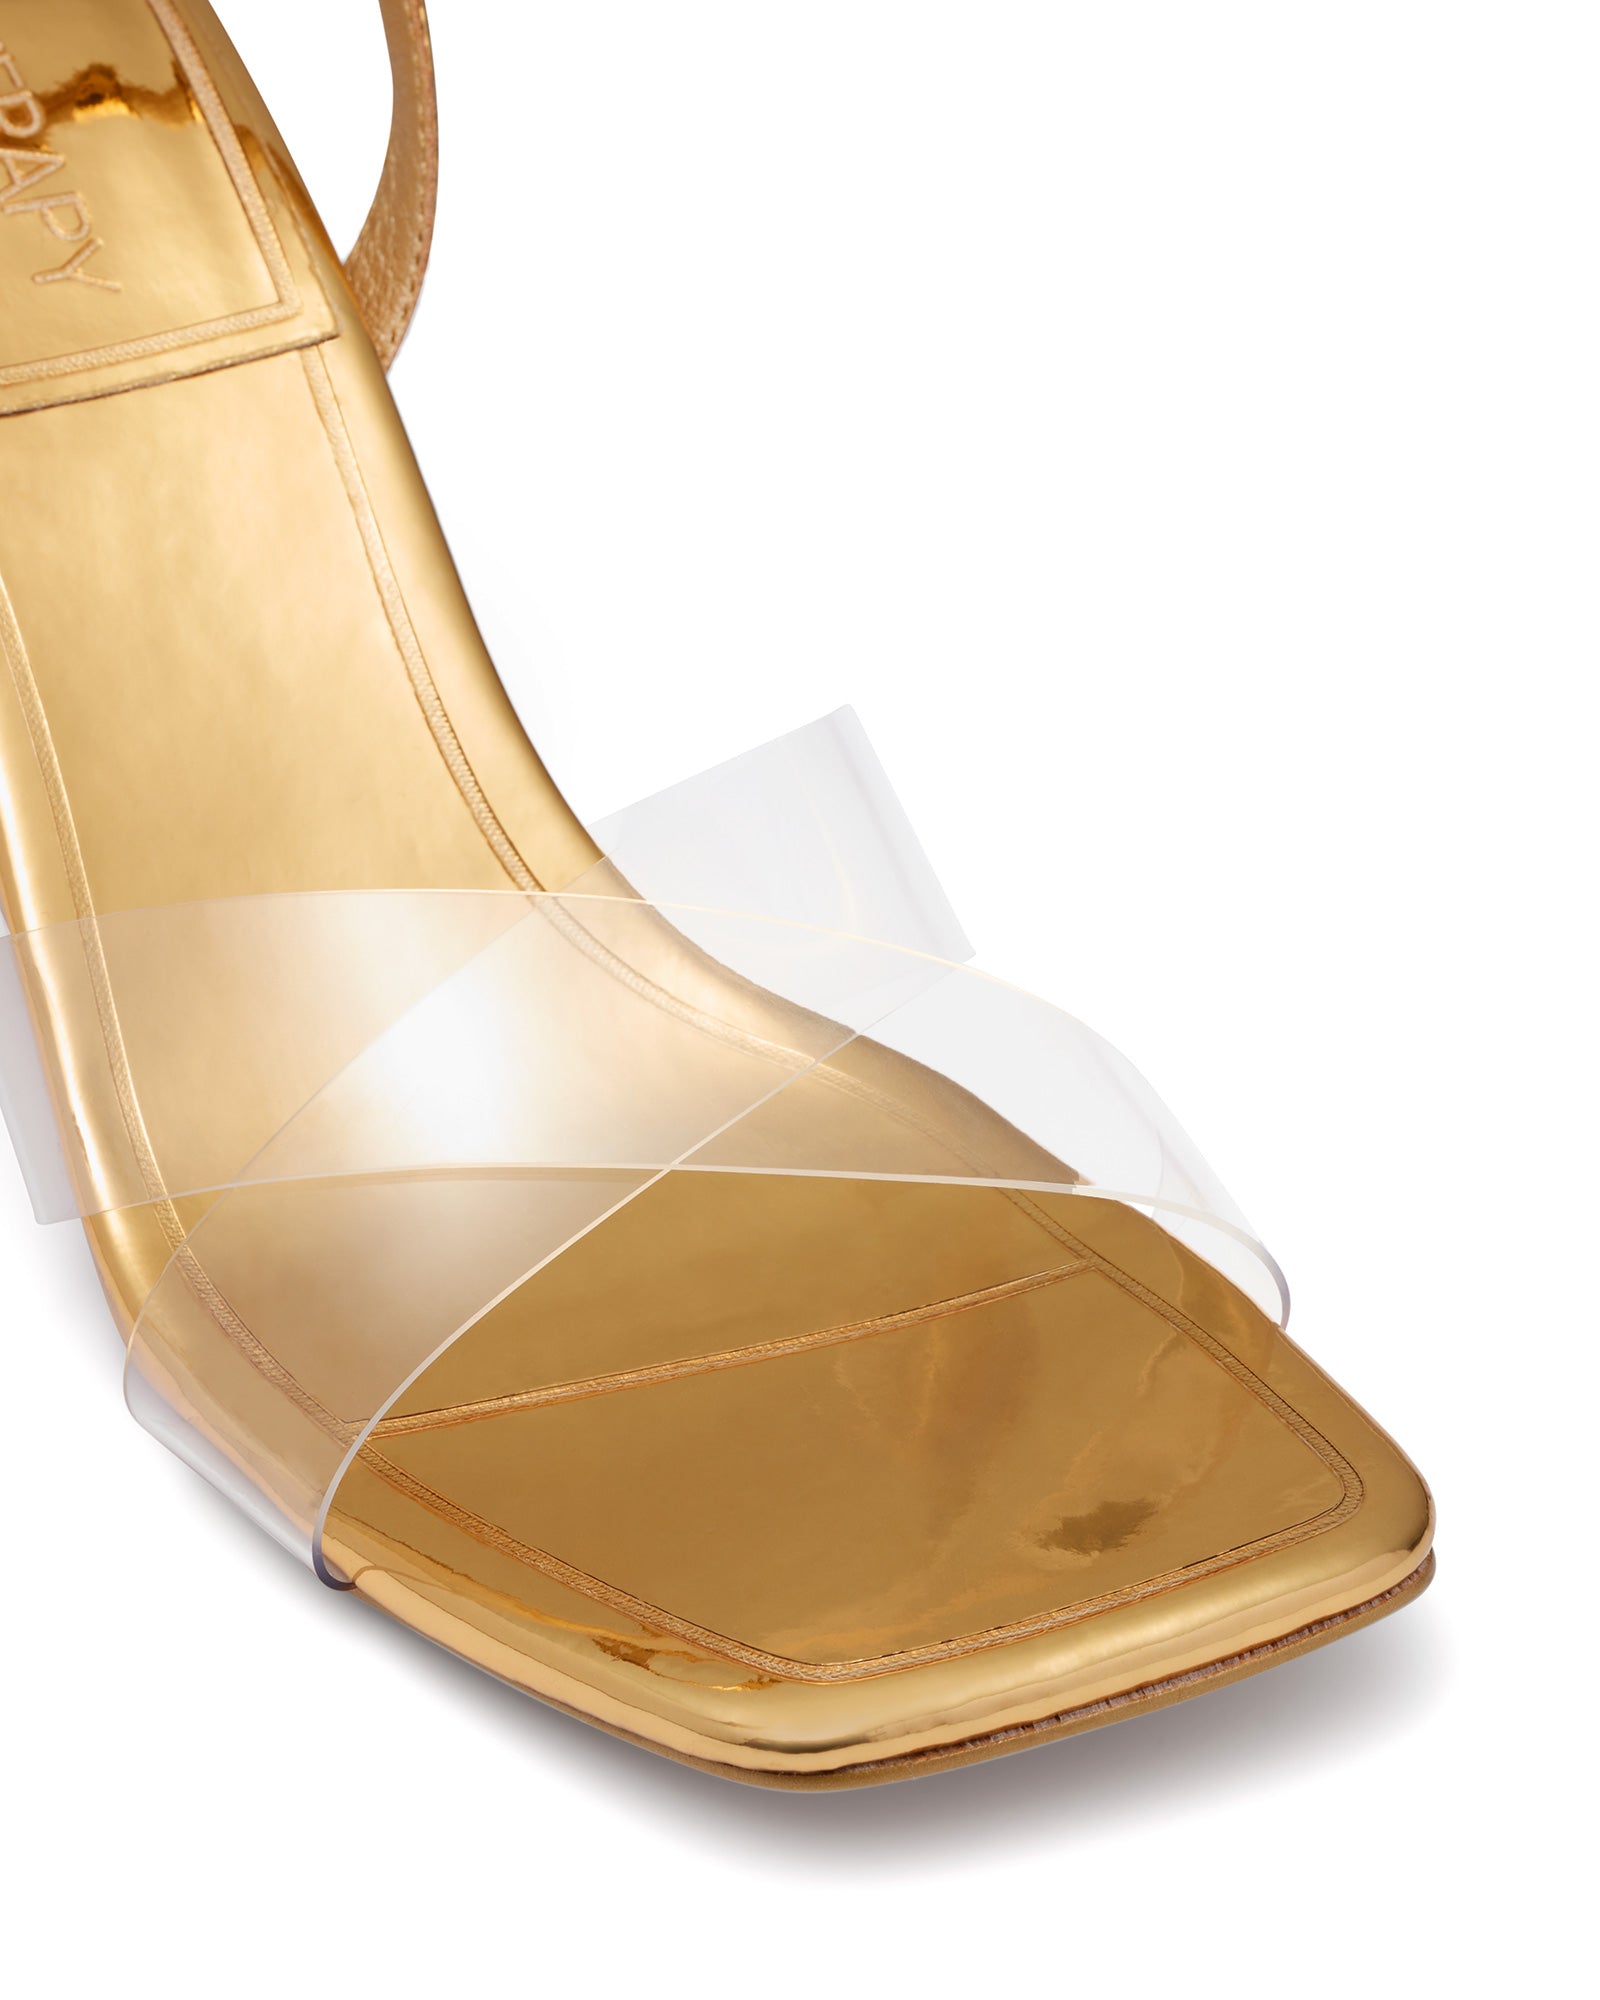 Therapy Shoes Dita Gold | Women's Heels | Sandals | Stiletto | Mule